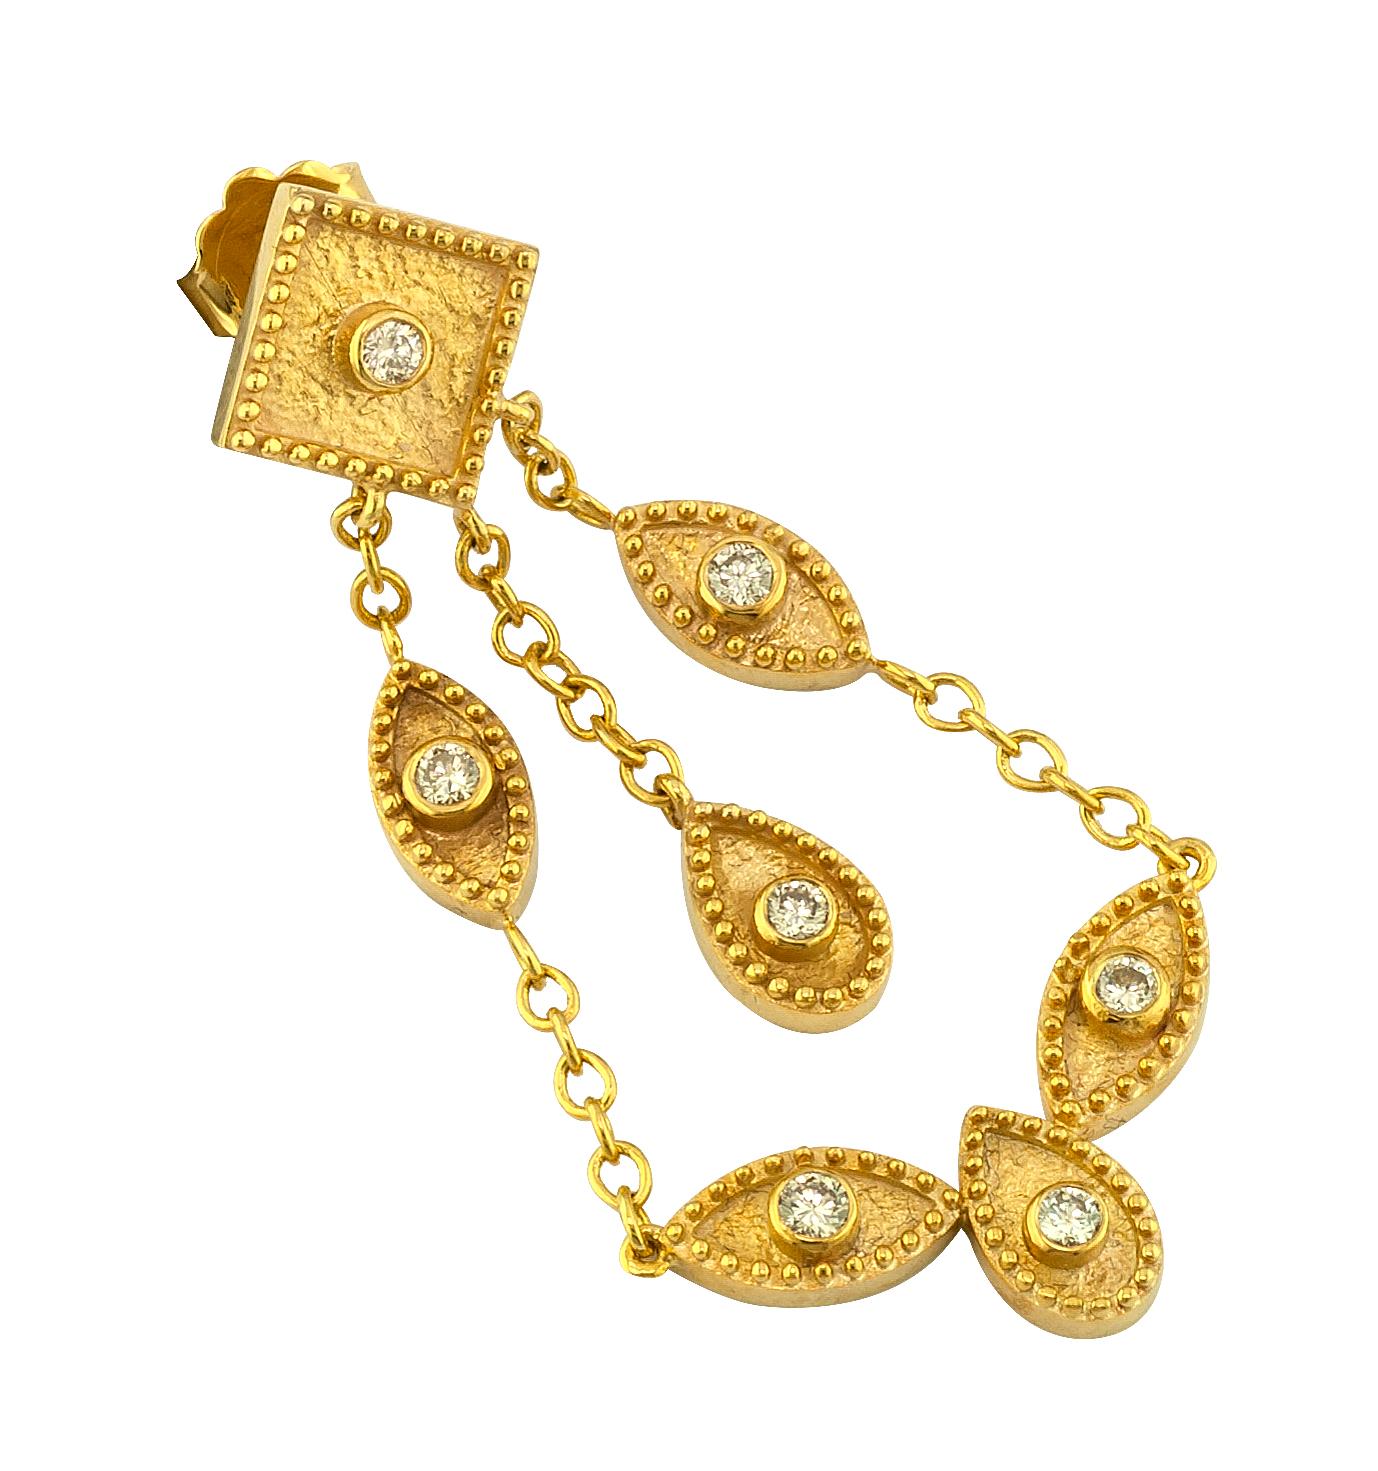 These S.Georgios designer drop chandelier gorgeous earrings are hand made from 18 Karat Yellow Gold and decorated with Byzantine-era style granulation workmanship done all microscopically and are finished with a lovely velvet background. This